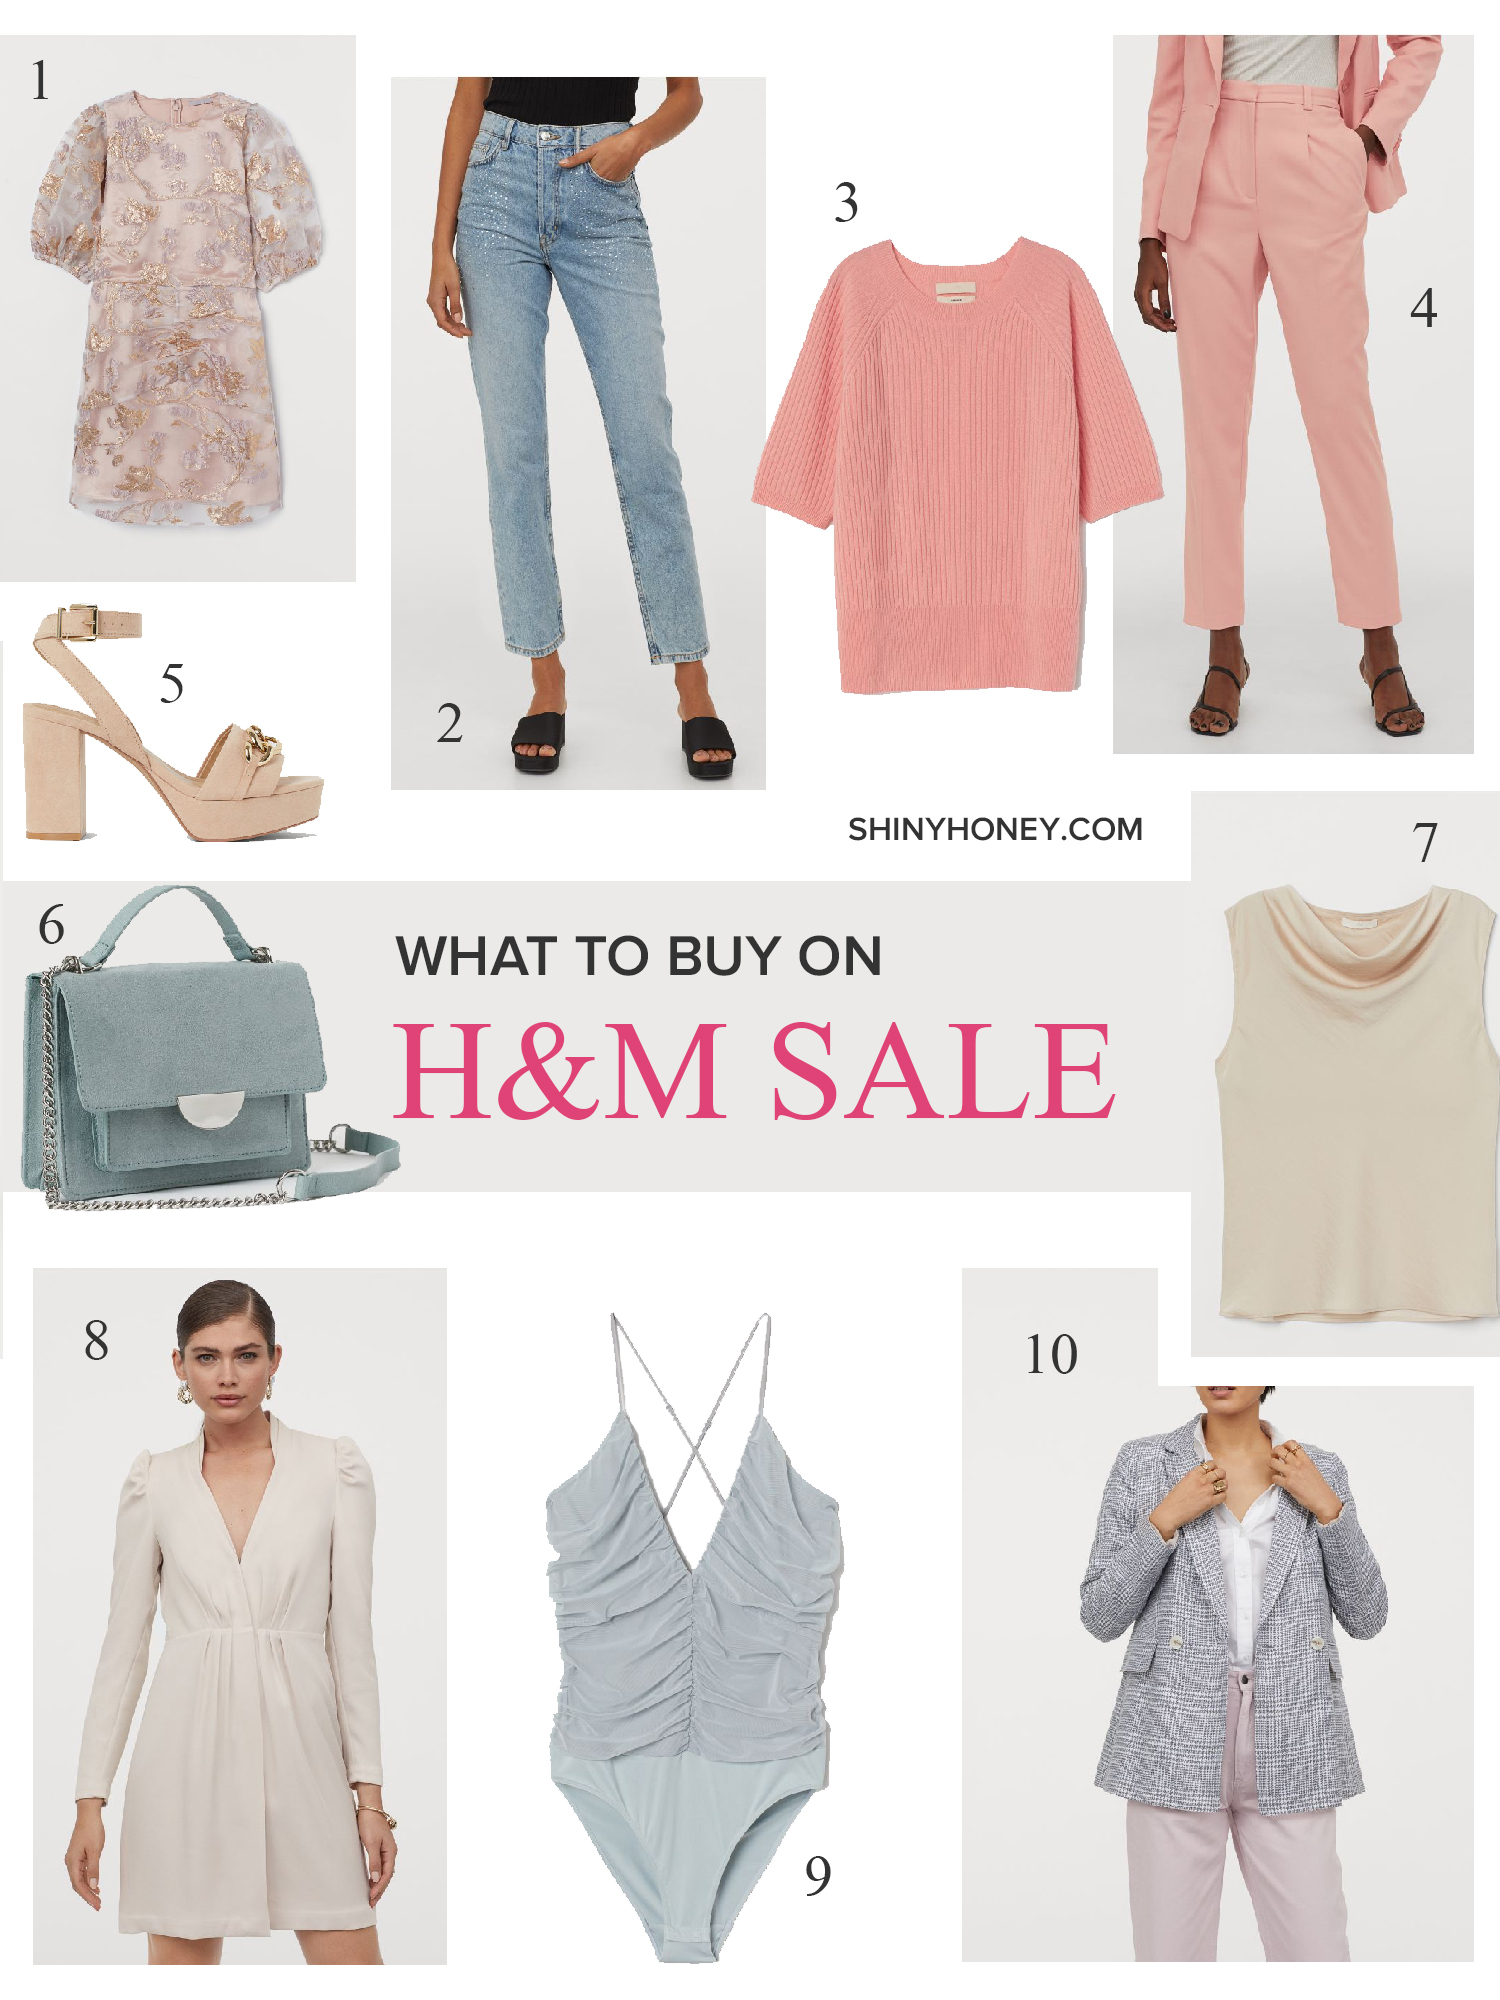 What To Buy On H&M Sale